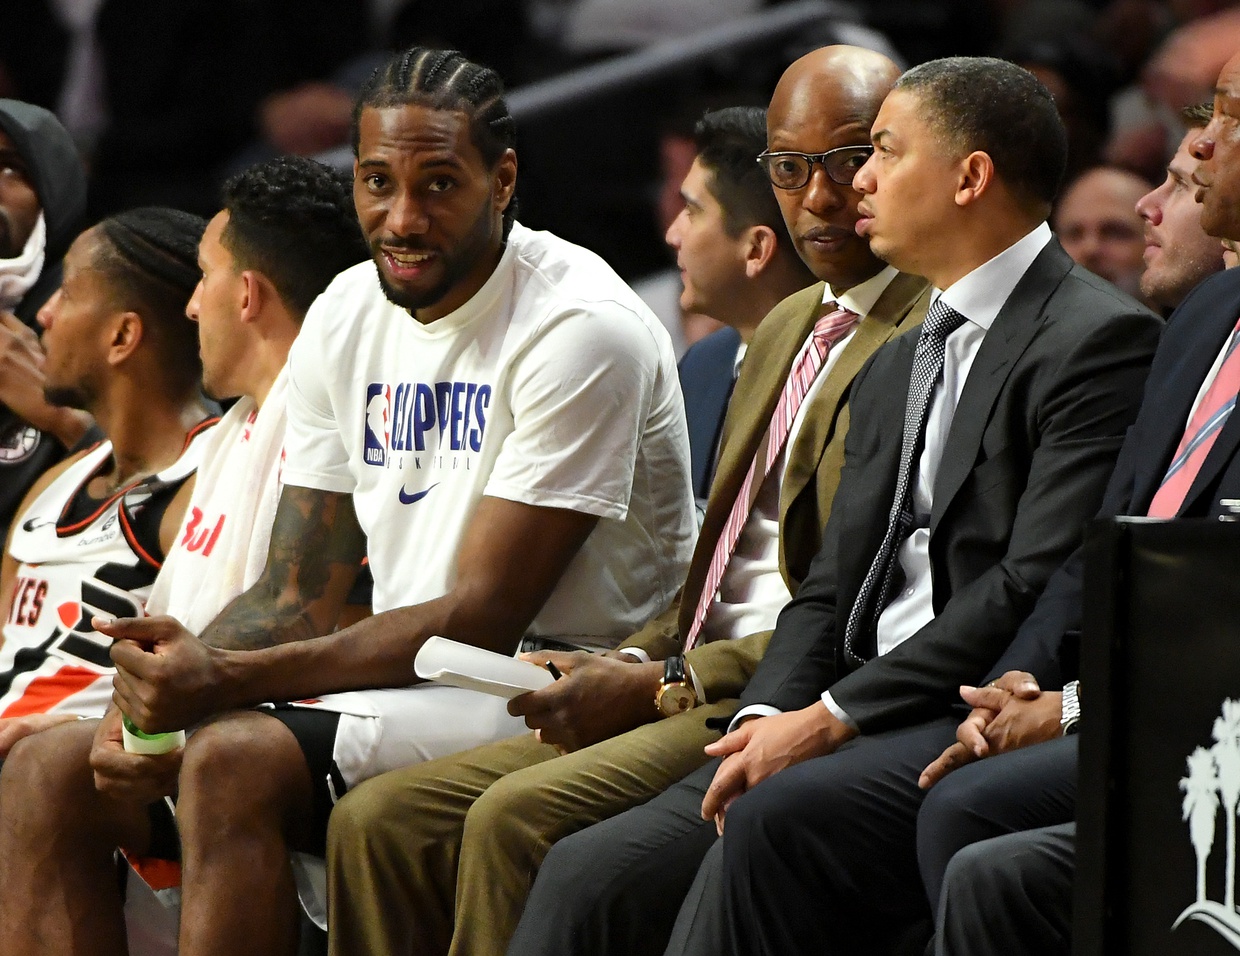 Jan 14, 2020; Los Angeles, California, USA; Los Angeles Clippers forward Kawhi Leonard (2) talks to coaches Sam Cassell and Tyronn Lue on the bench in the second half of the game against the Cleveland Cavaliers at Staples Center. Mandatory Credit: Jayne Kamin-Oncea-USA TODAY Sports